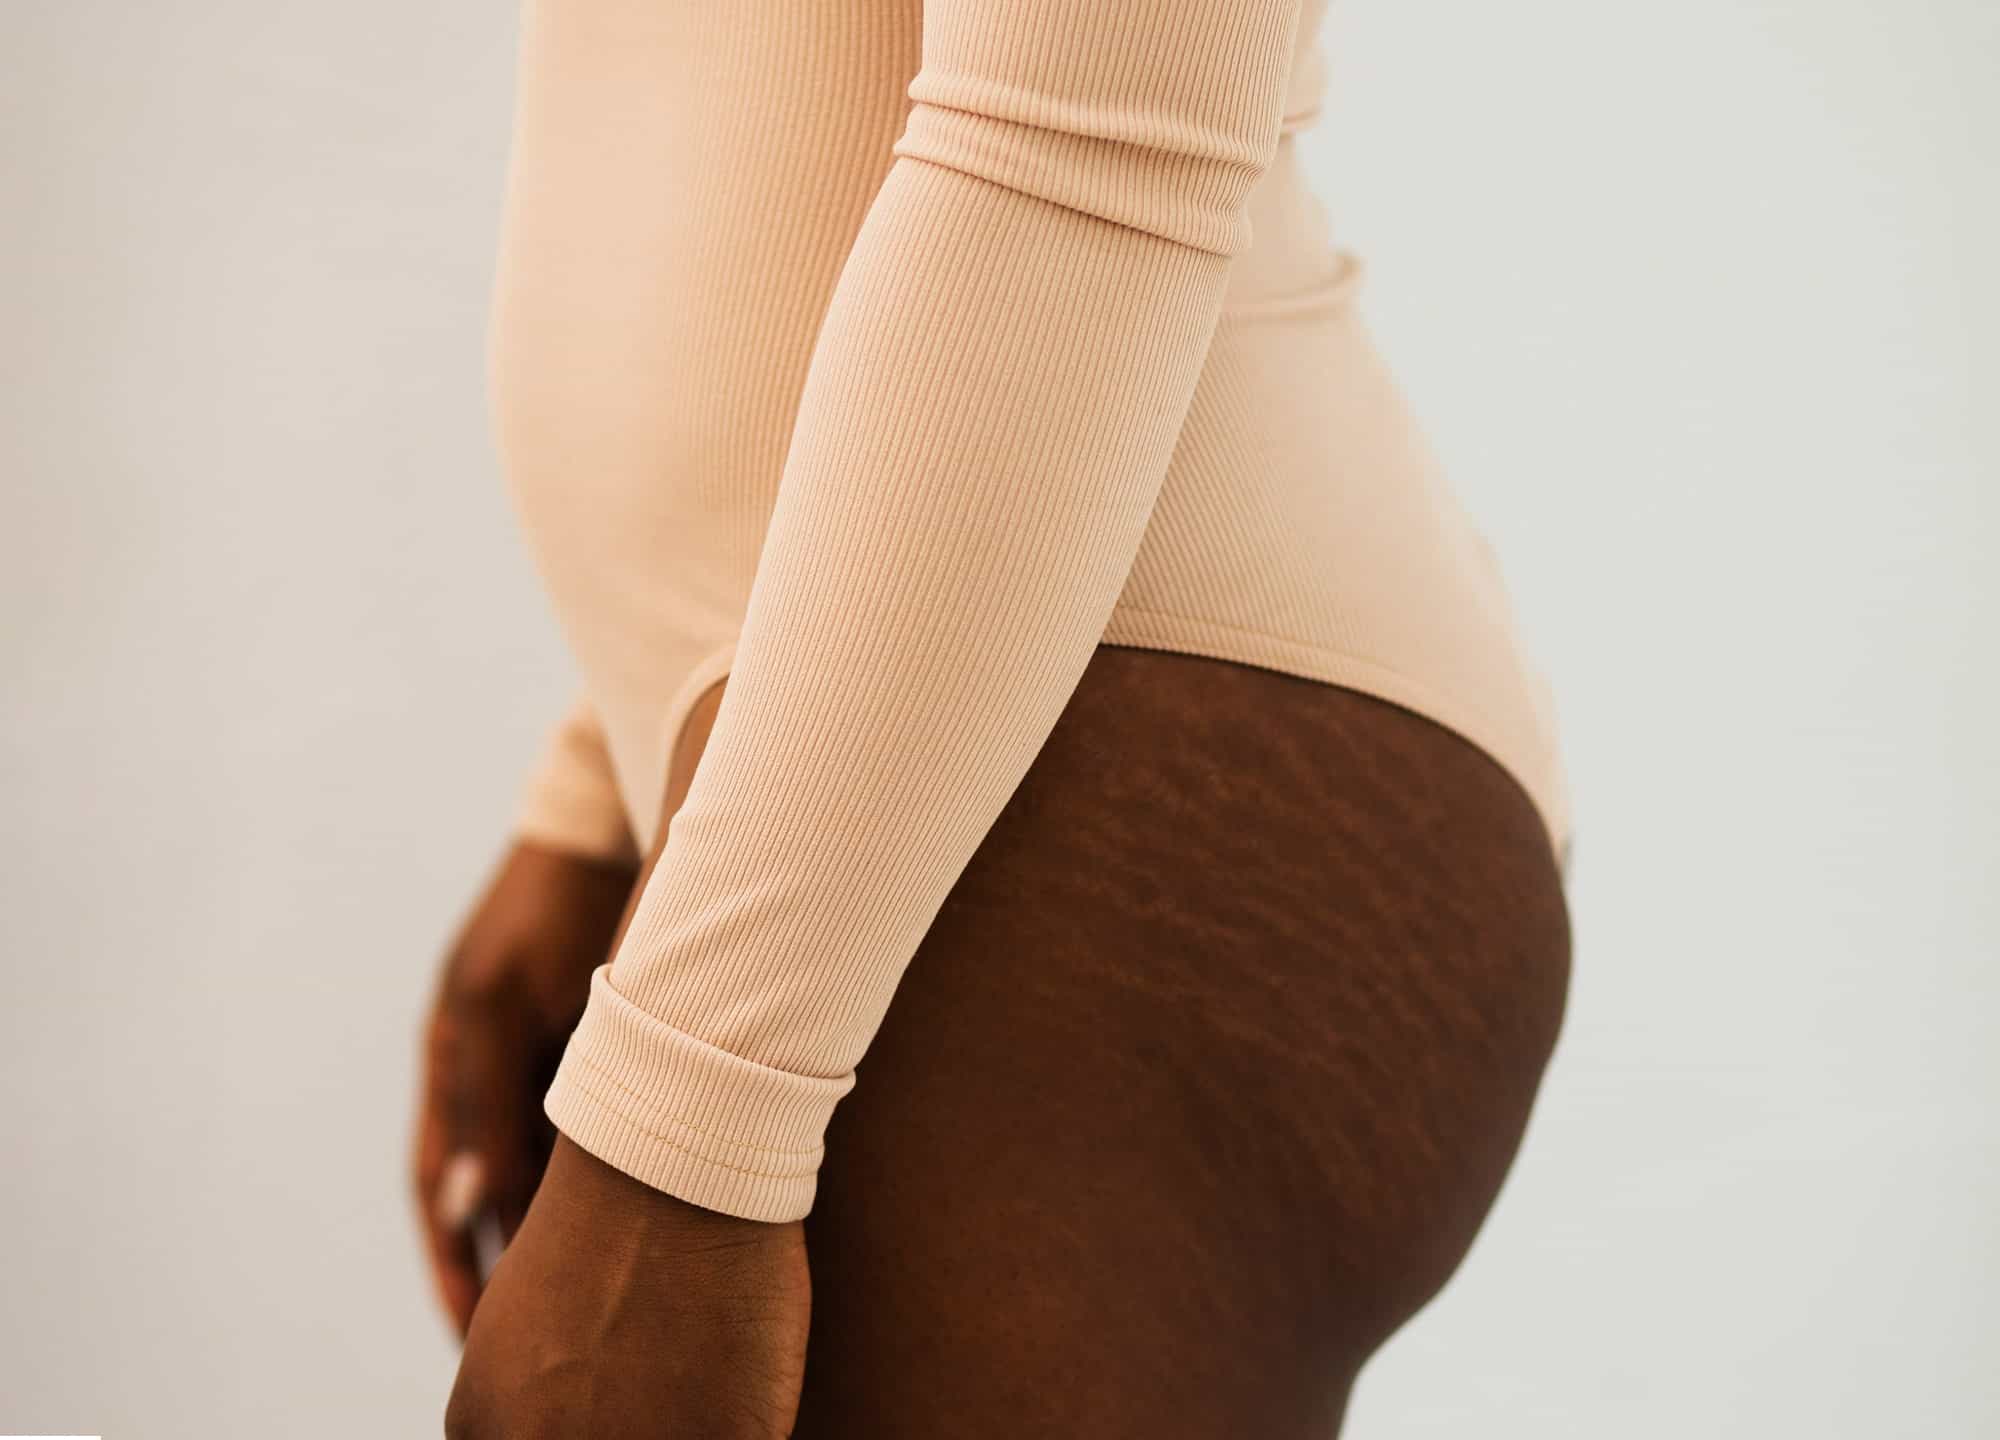 I hated my Brazilian butt lift — and paid $25,000 to have it reversed